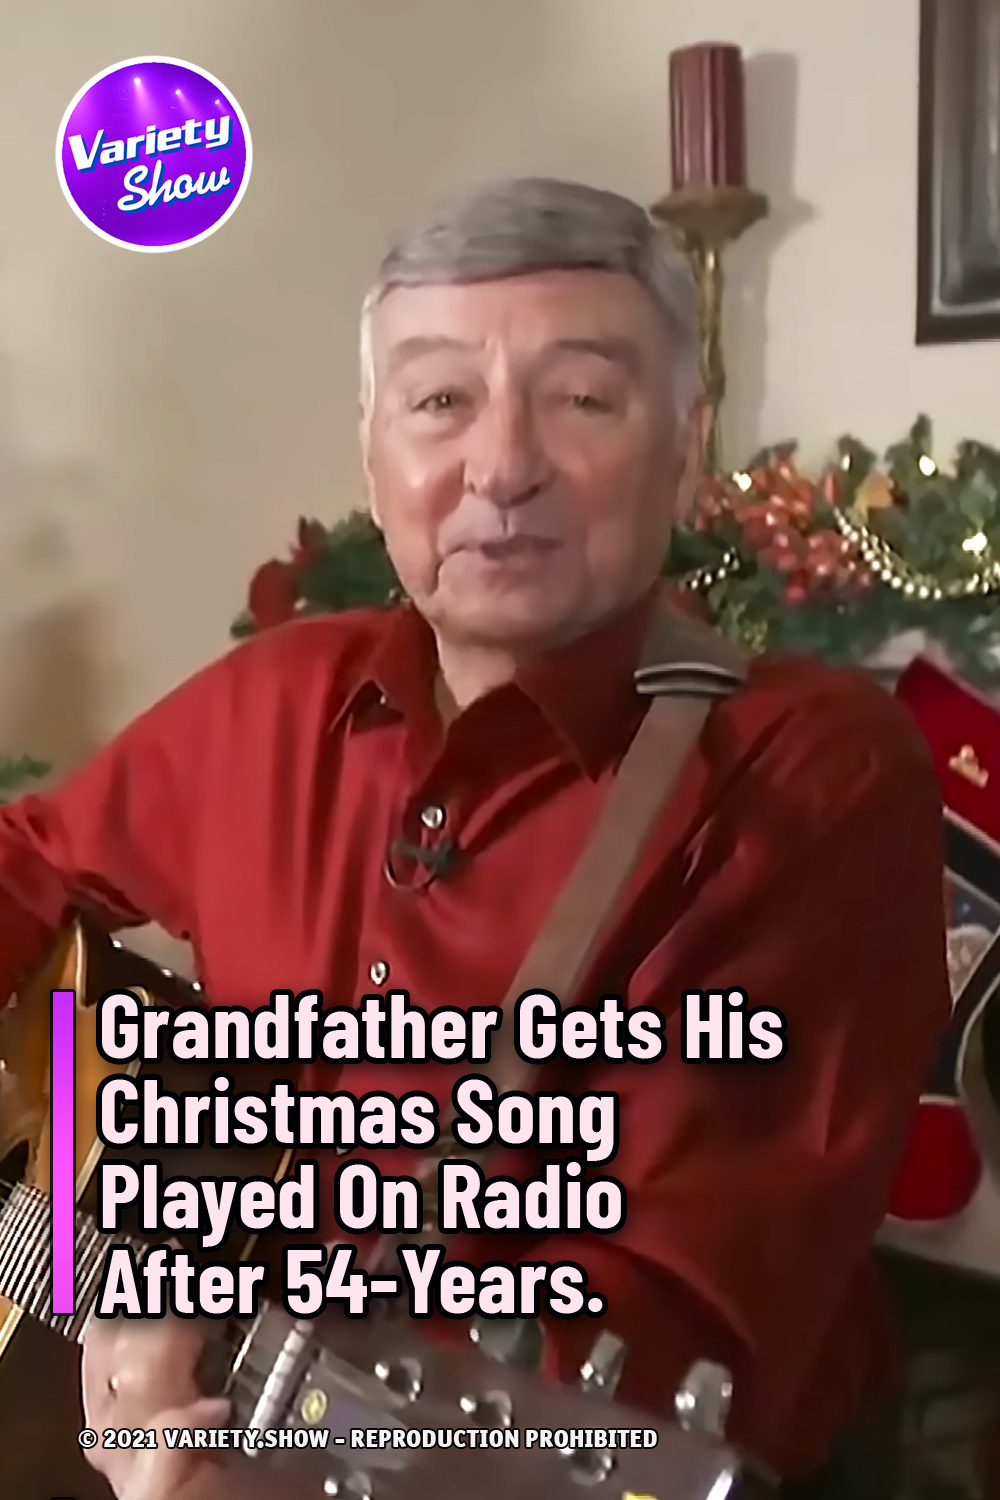 Grandfather Gets His Christmas Song Played On Radio After 54-Years.